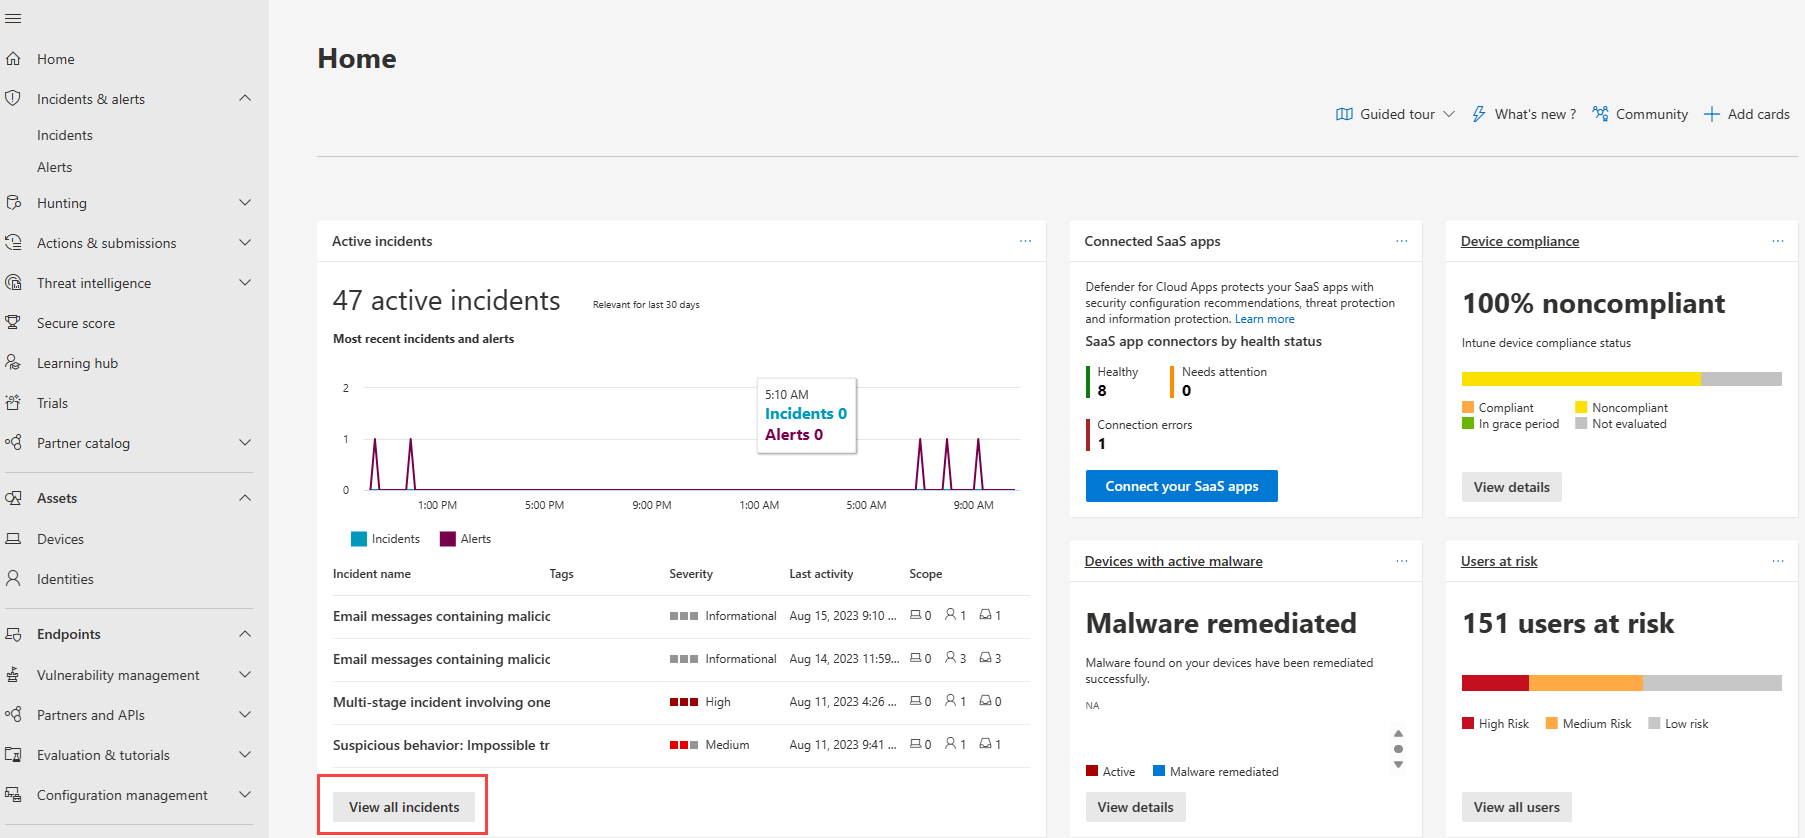 View all incidents shown in Microsoft Defender XDR home page